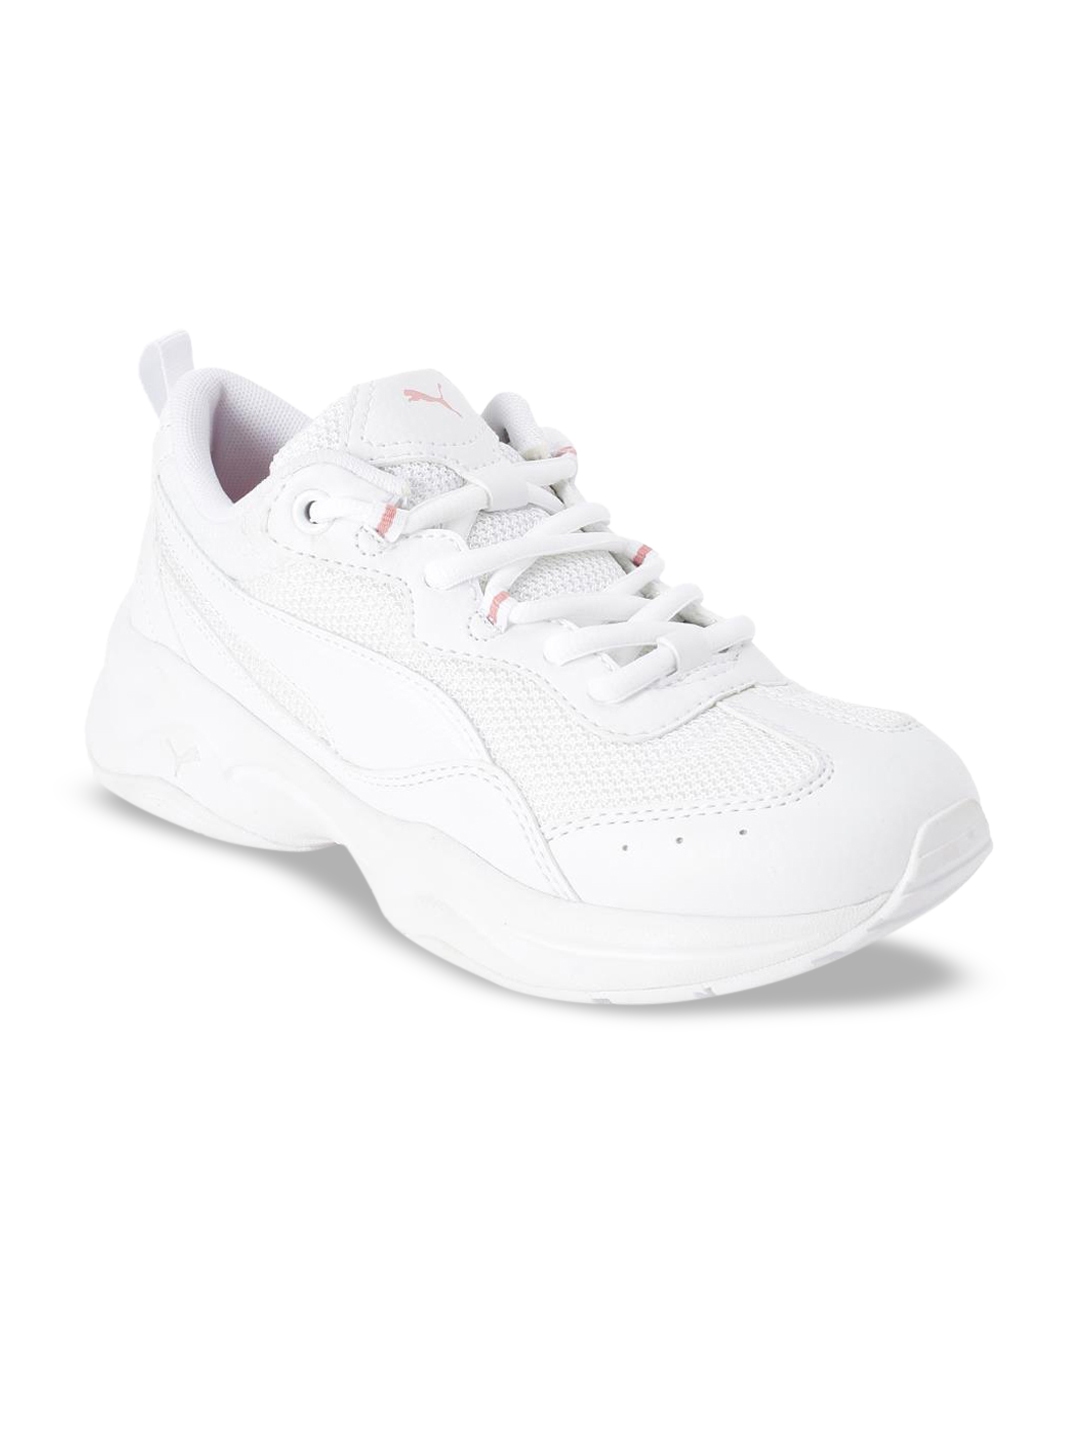 Buy Puma Girls White Cilia Jr Sneakers - Casual Shoes for Girls ...